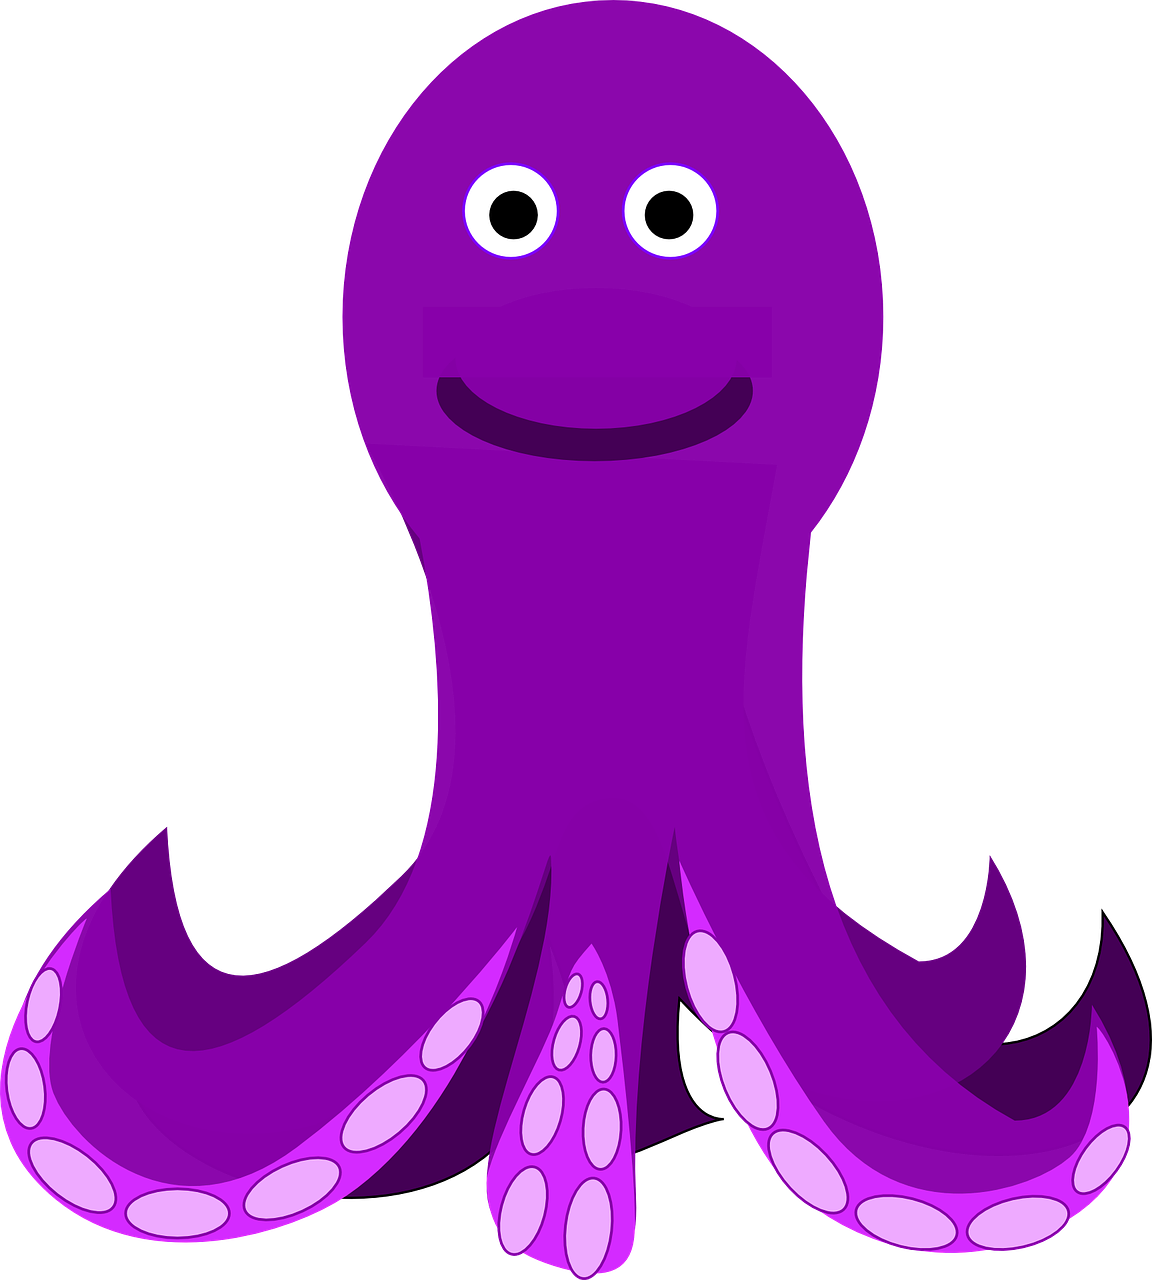 Download free photo of Octopus,purple,happy,smiling,cartoon - from  